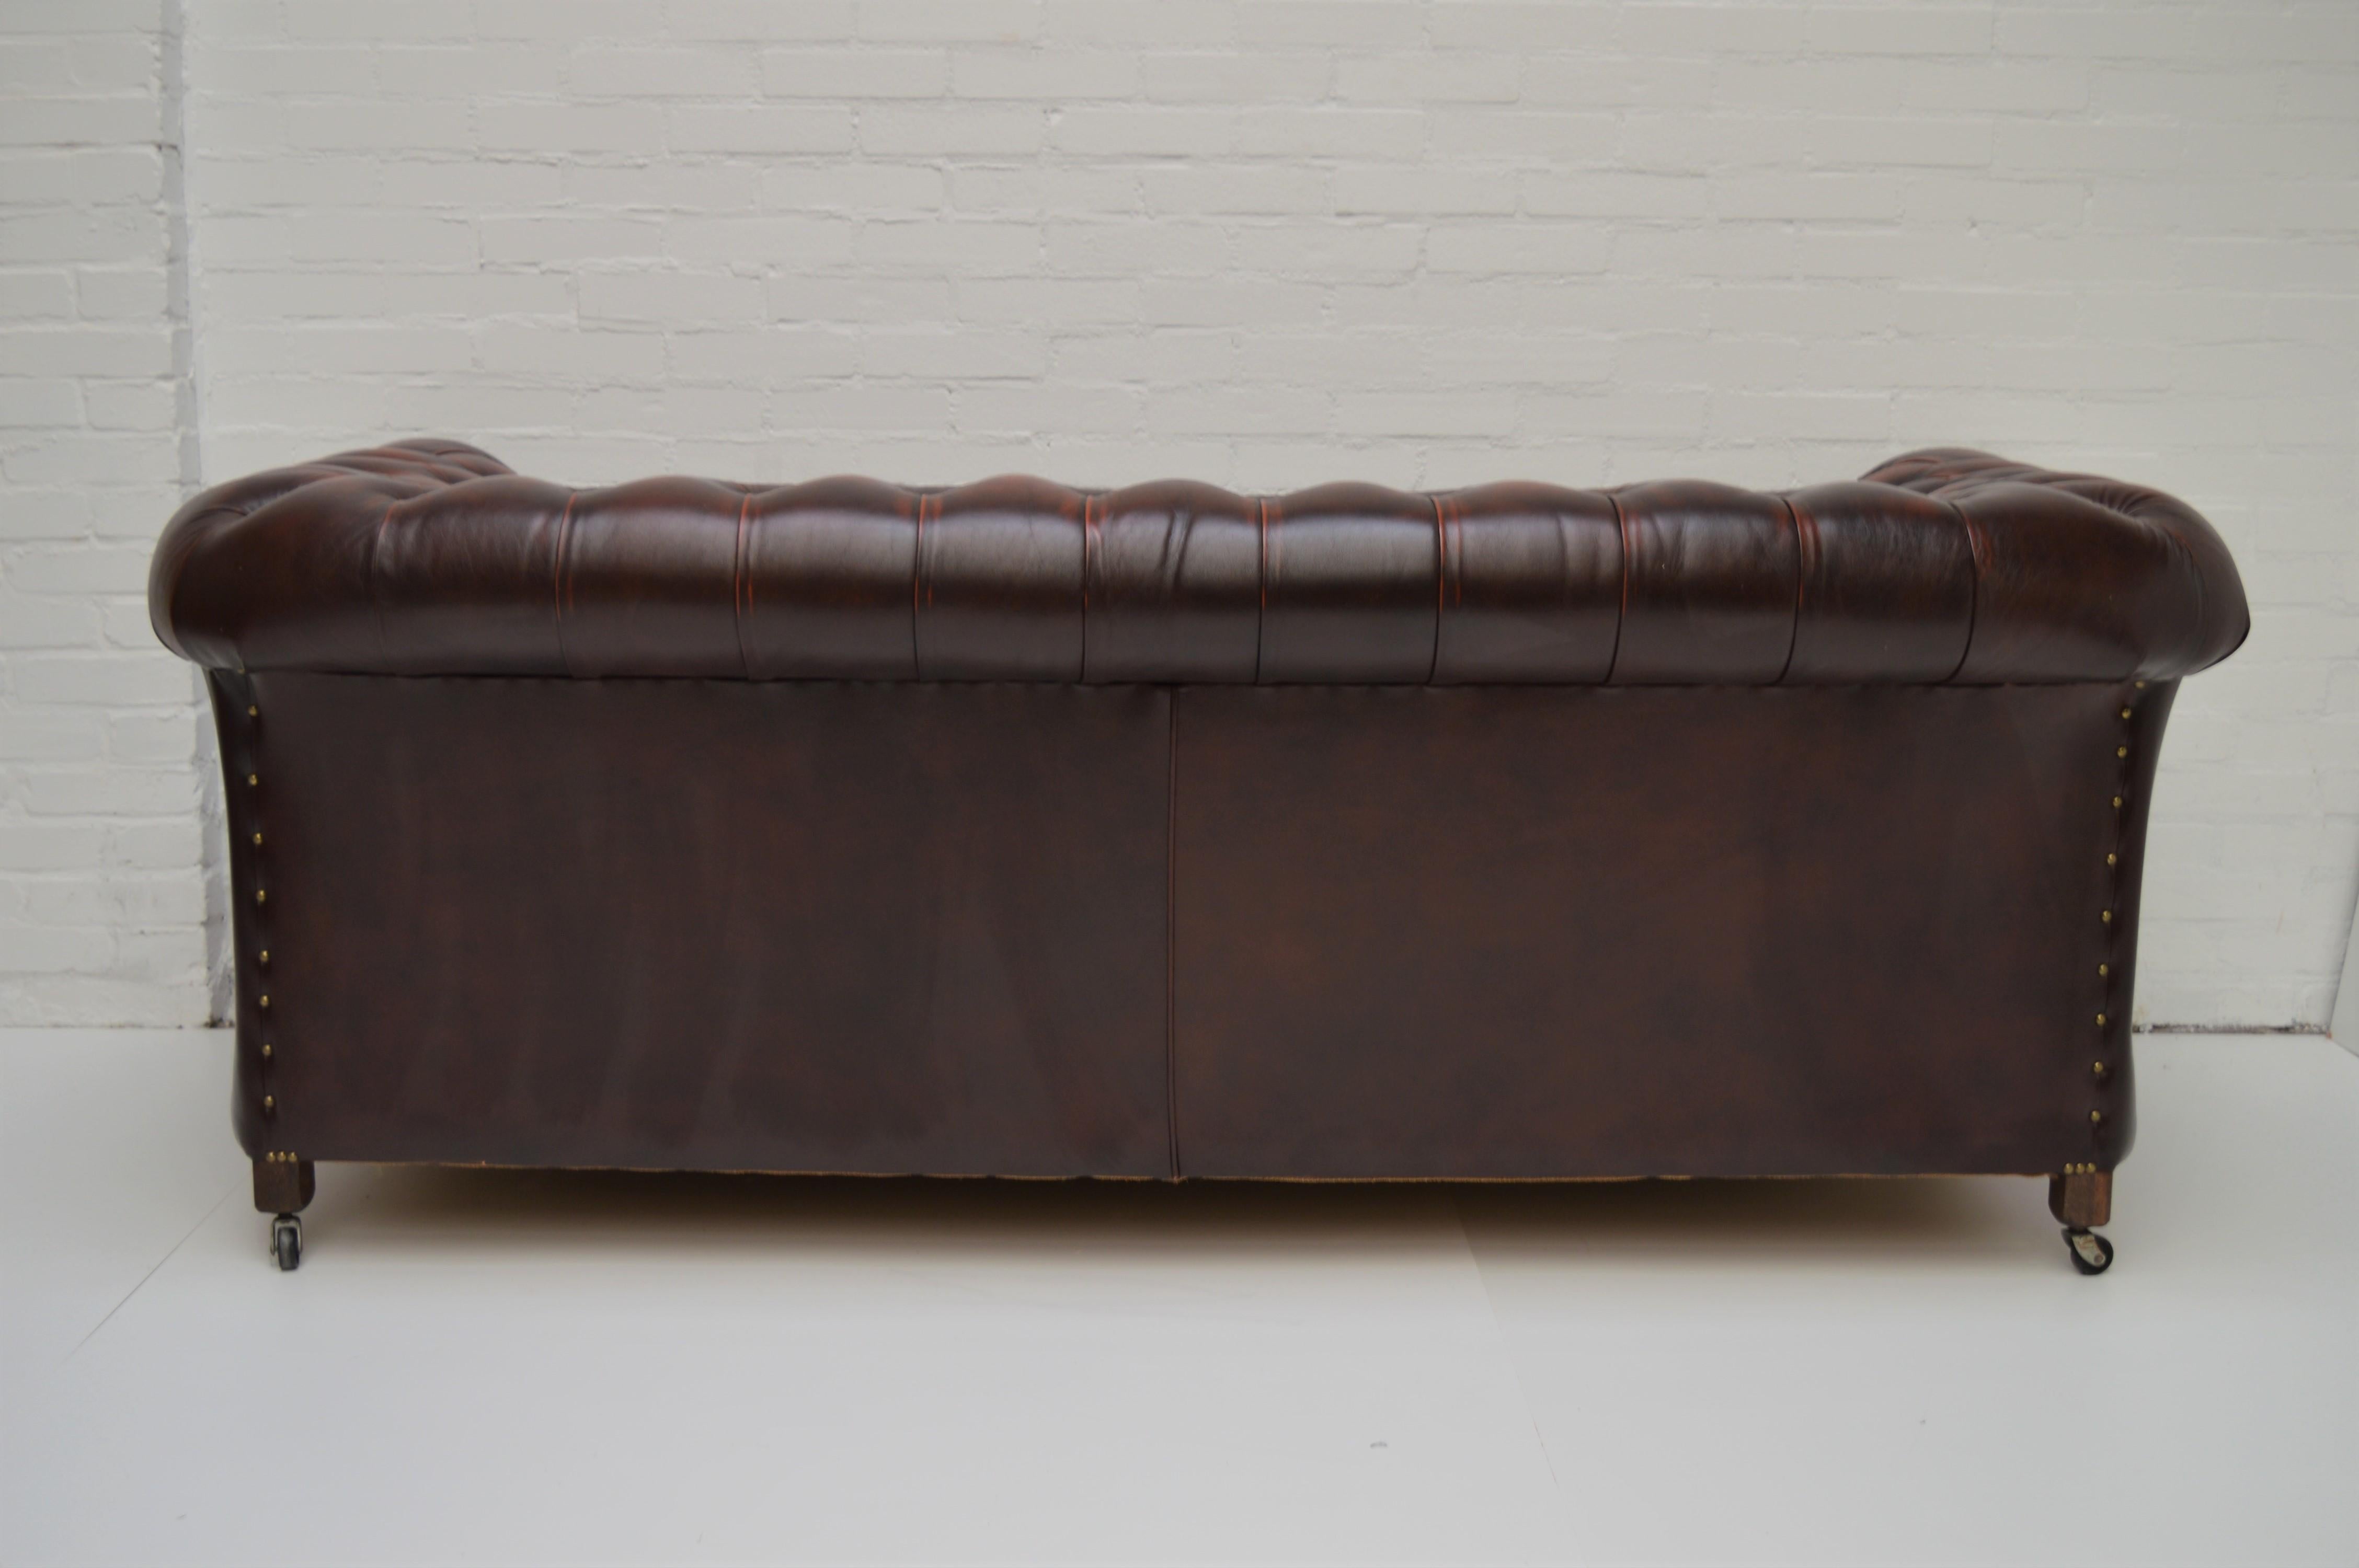 Antique Tan Chesterfield Sofa with Brass Castors / Wheels For Sale 3